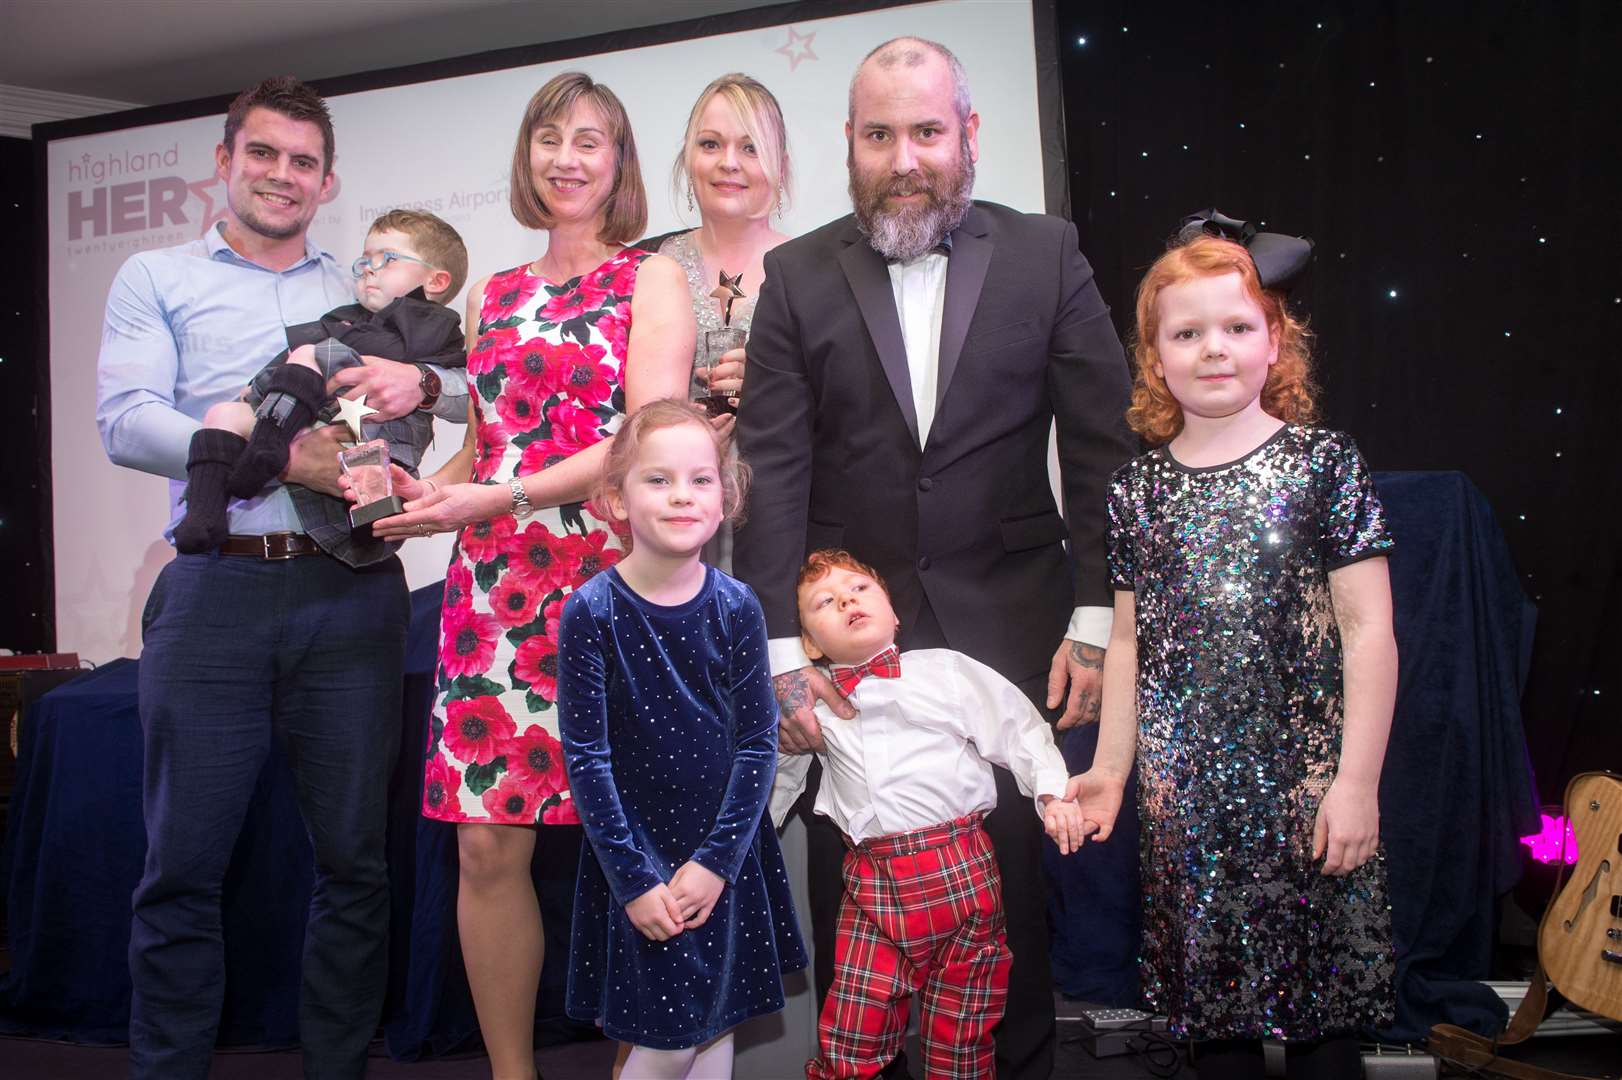 Leo Flett and Sam Douglas with their family receiving the Highland Heroes brave child award at last year’s event. Photo: Callum Mackay/SPP